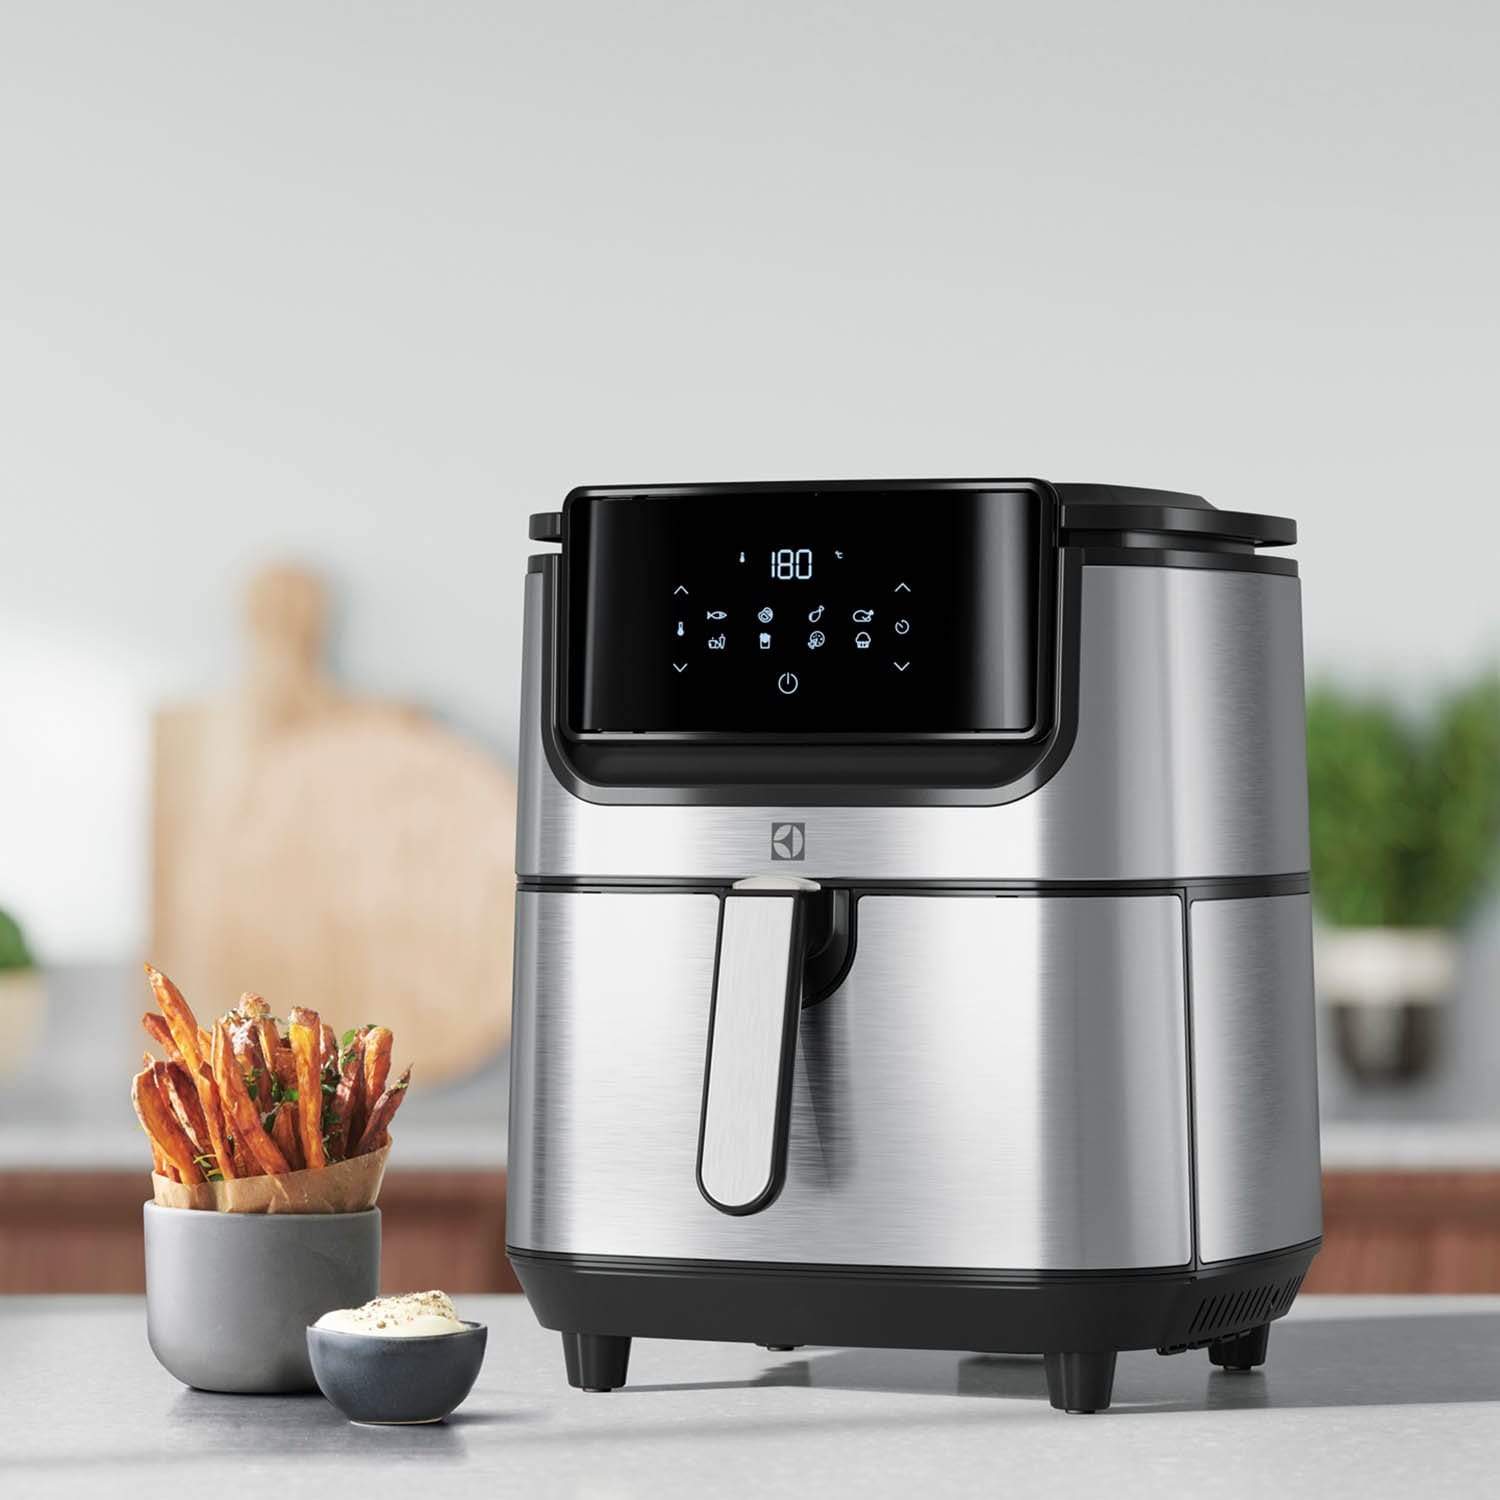 Electrolux E6AF1-720S Explore 6 Air Fryer Stainless Steel with Touch